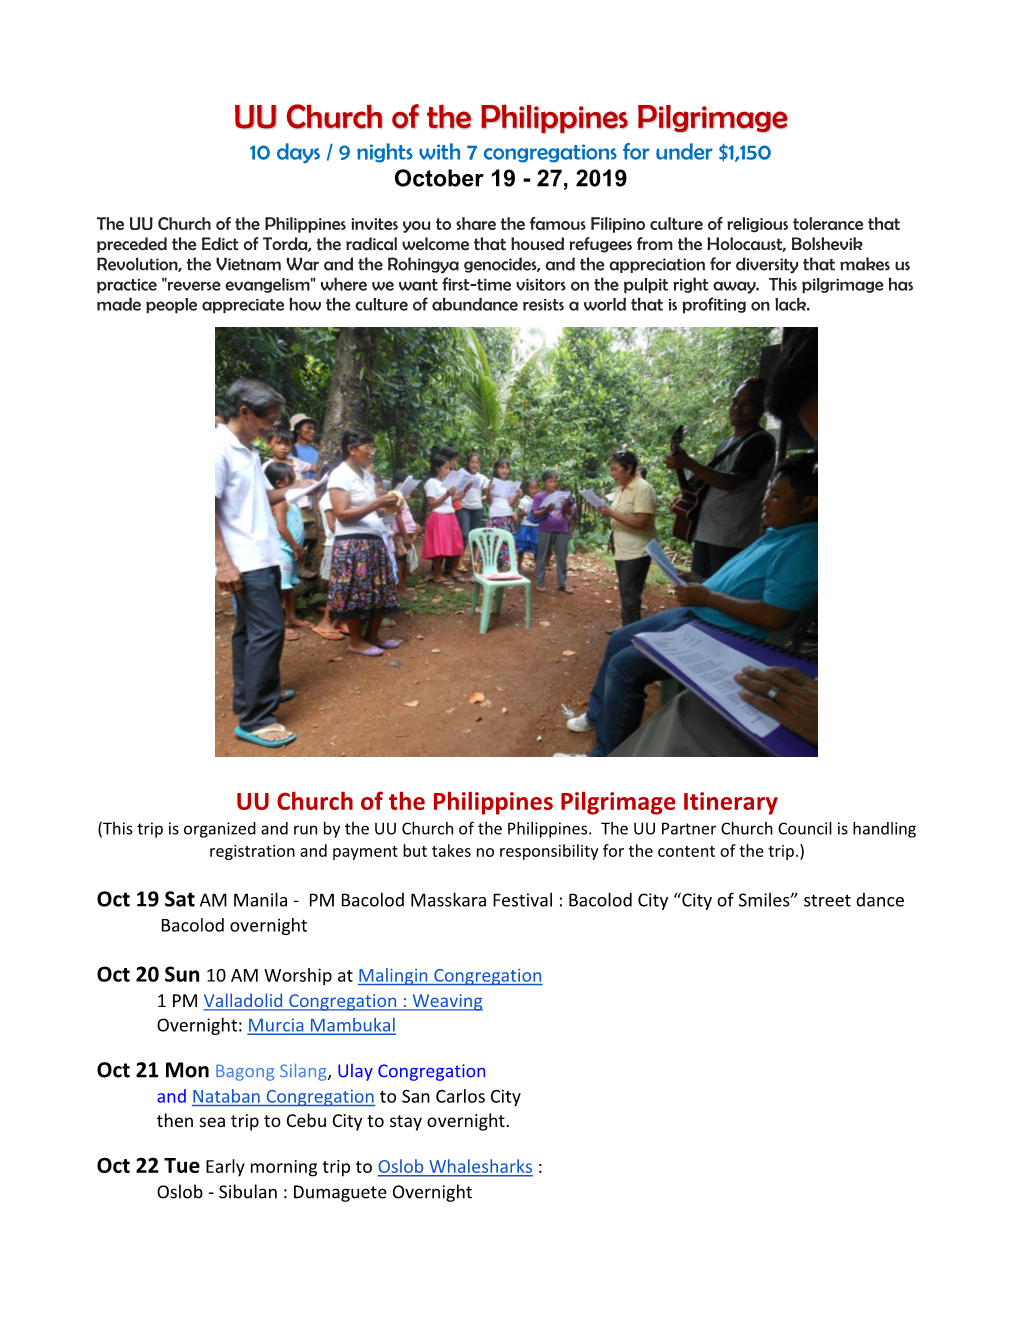 UU Church of the Philippines Pilgrimage 10 Days / 9 Nights with 7 Congregations for Under $1,150 October 19 - 27, 2019